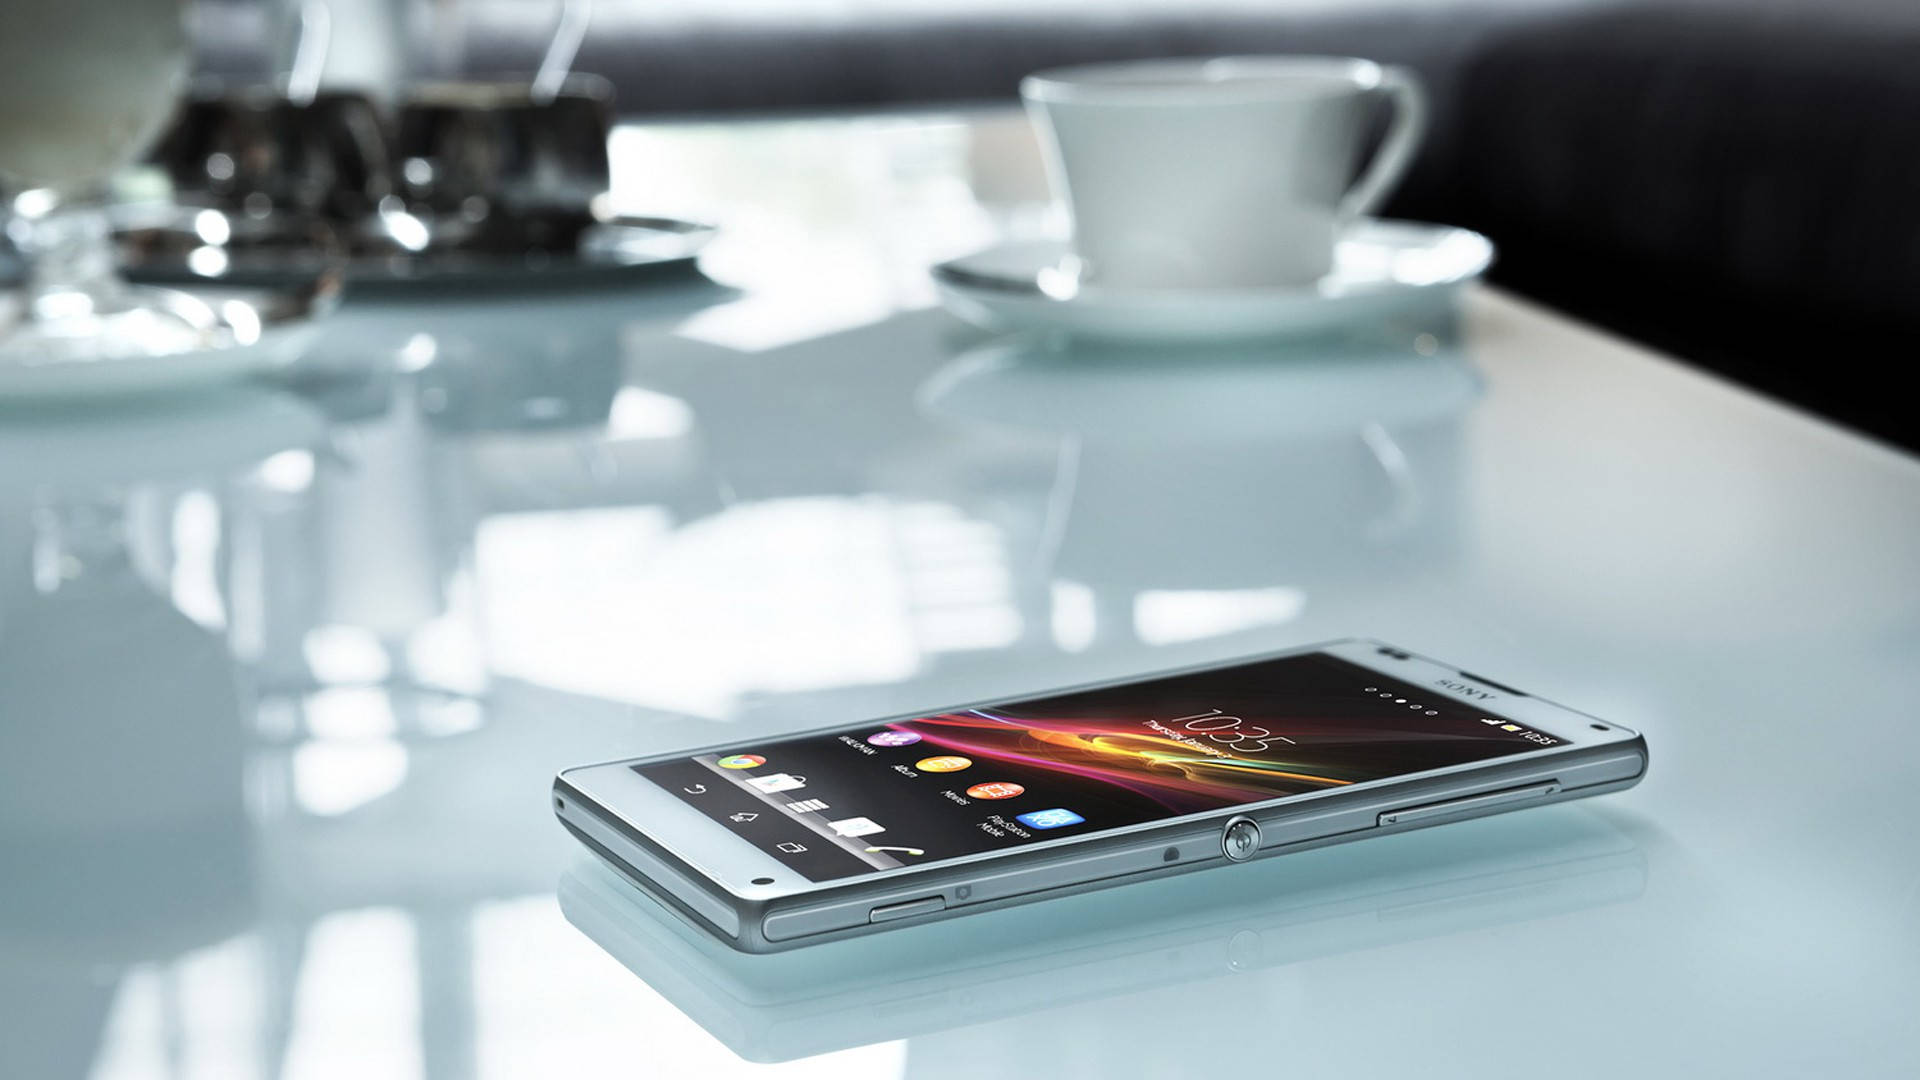 Sony Xperia On Table